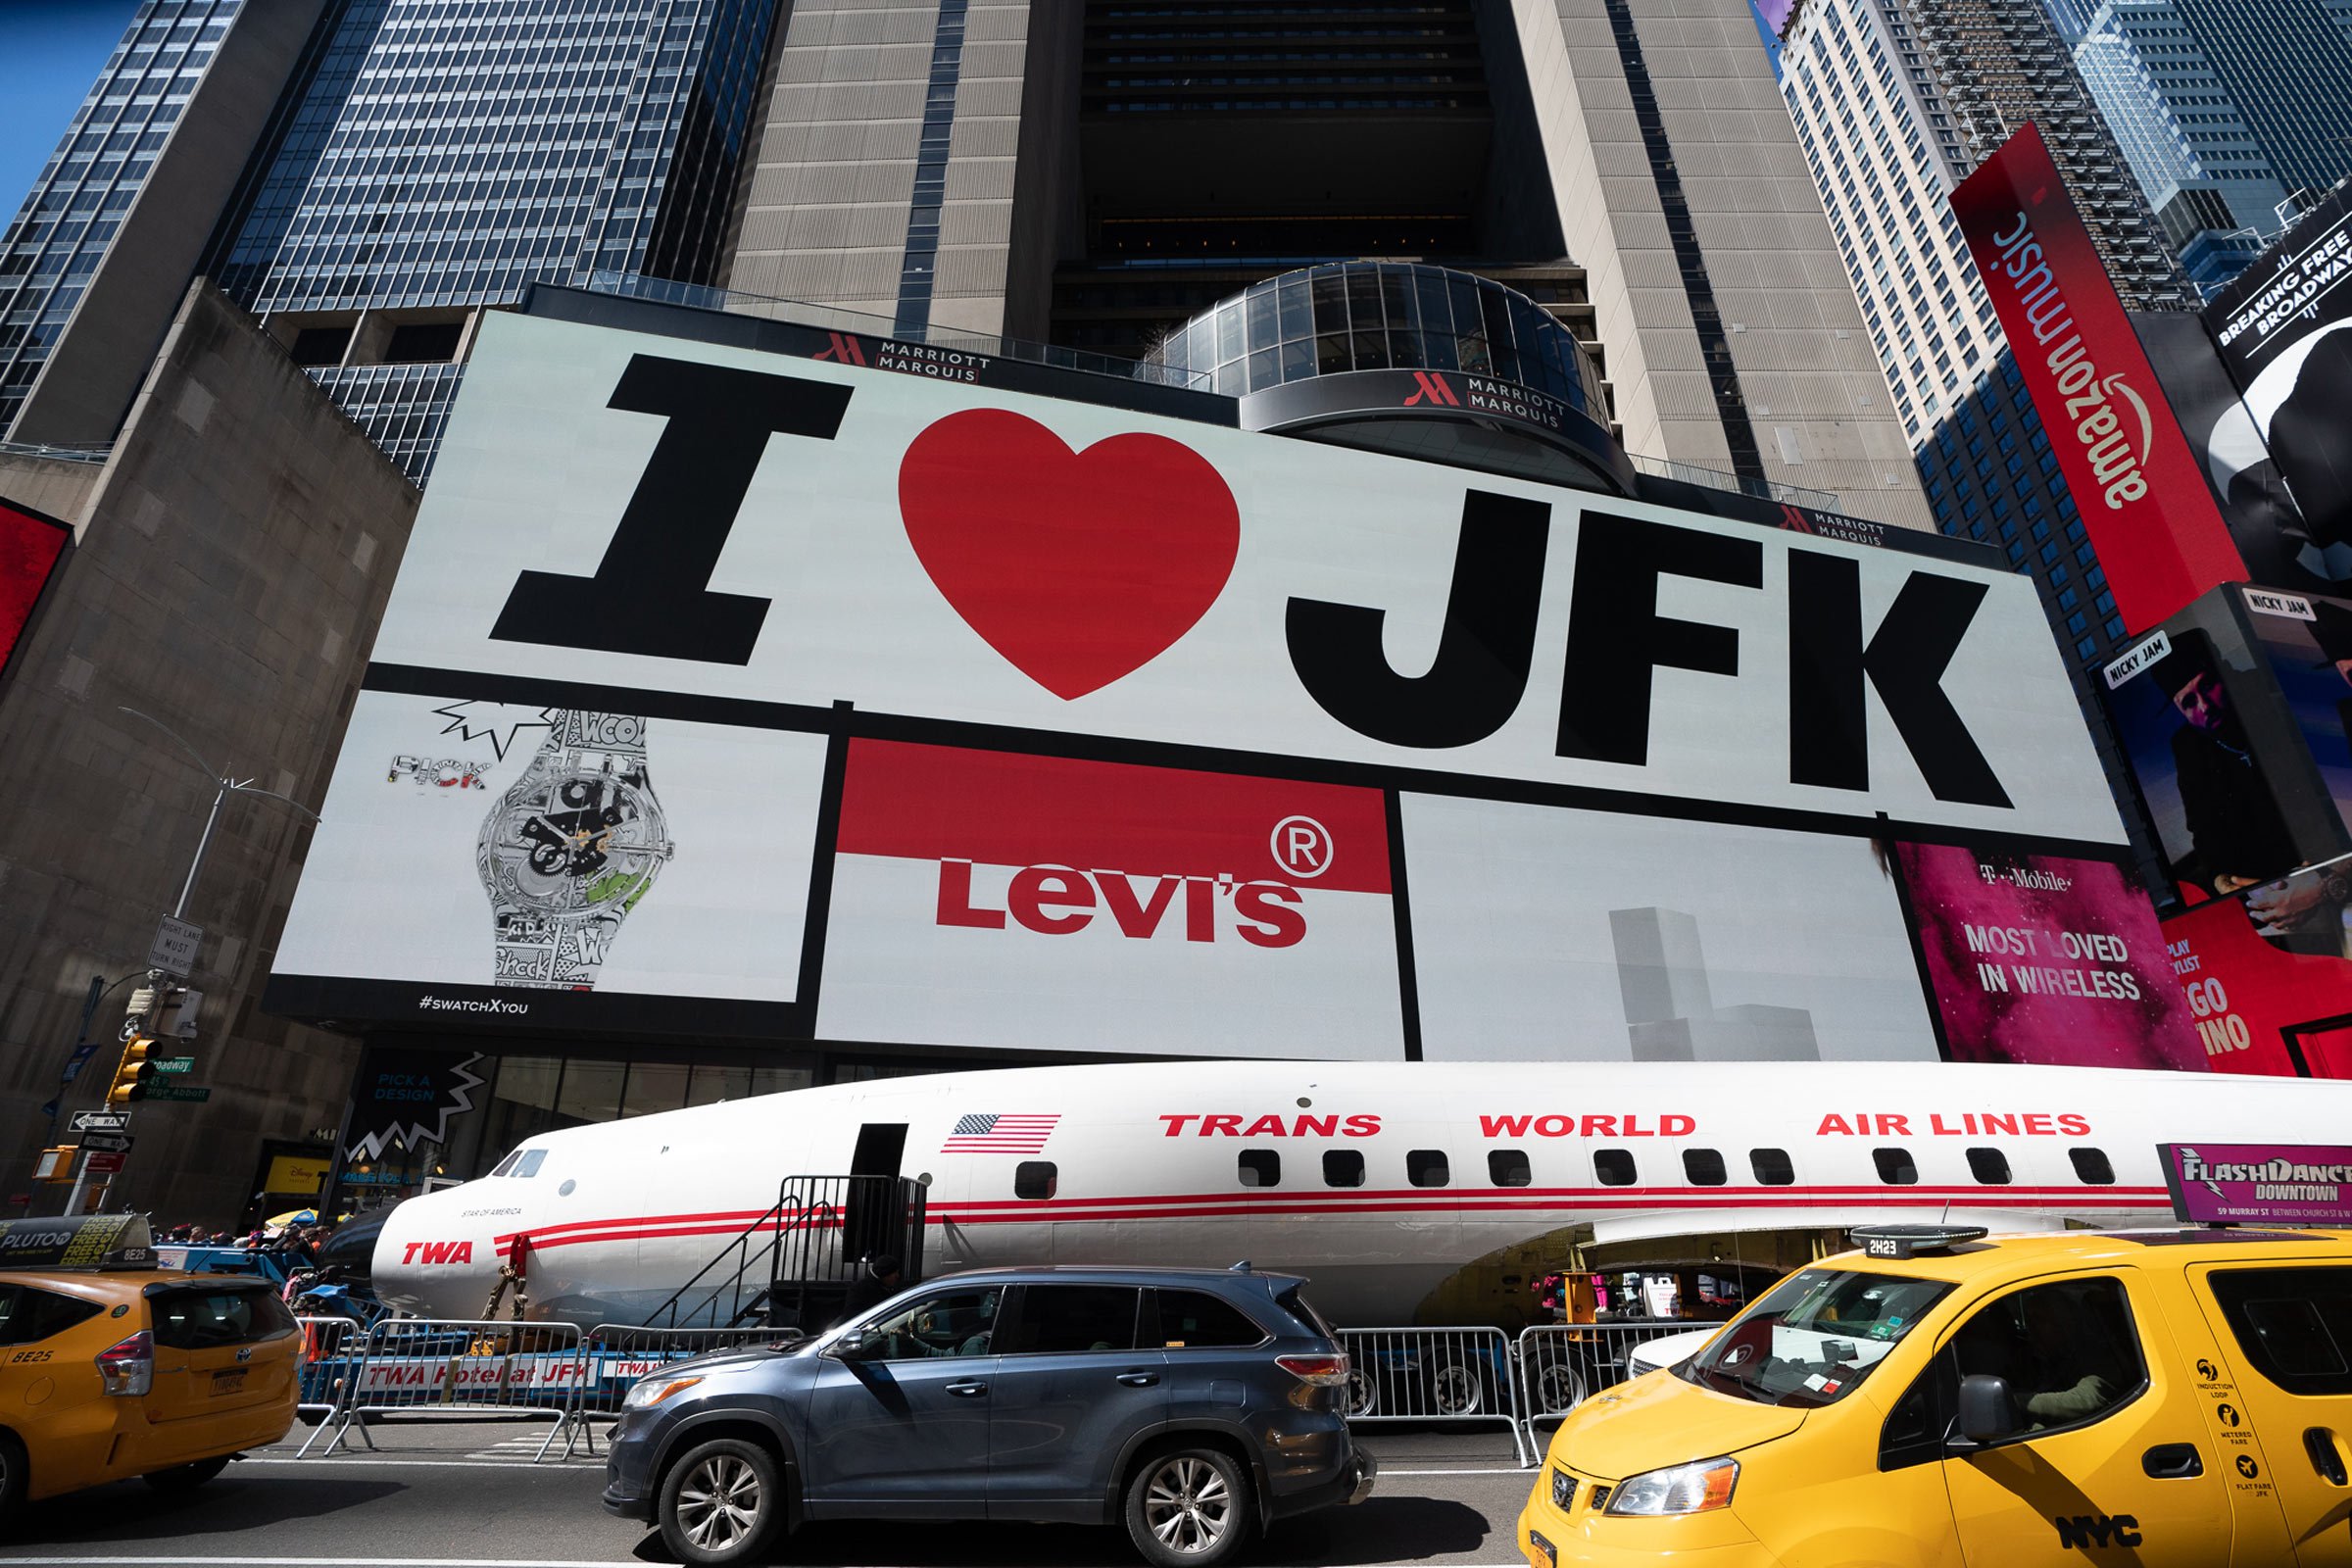 Connie can’t wait to become a cocktail lounge at JFK Airport, as this billboard attests on March 23, 2019.